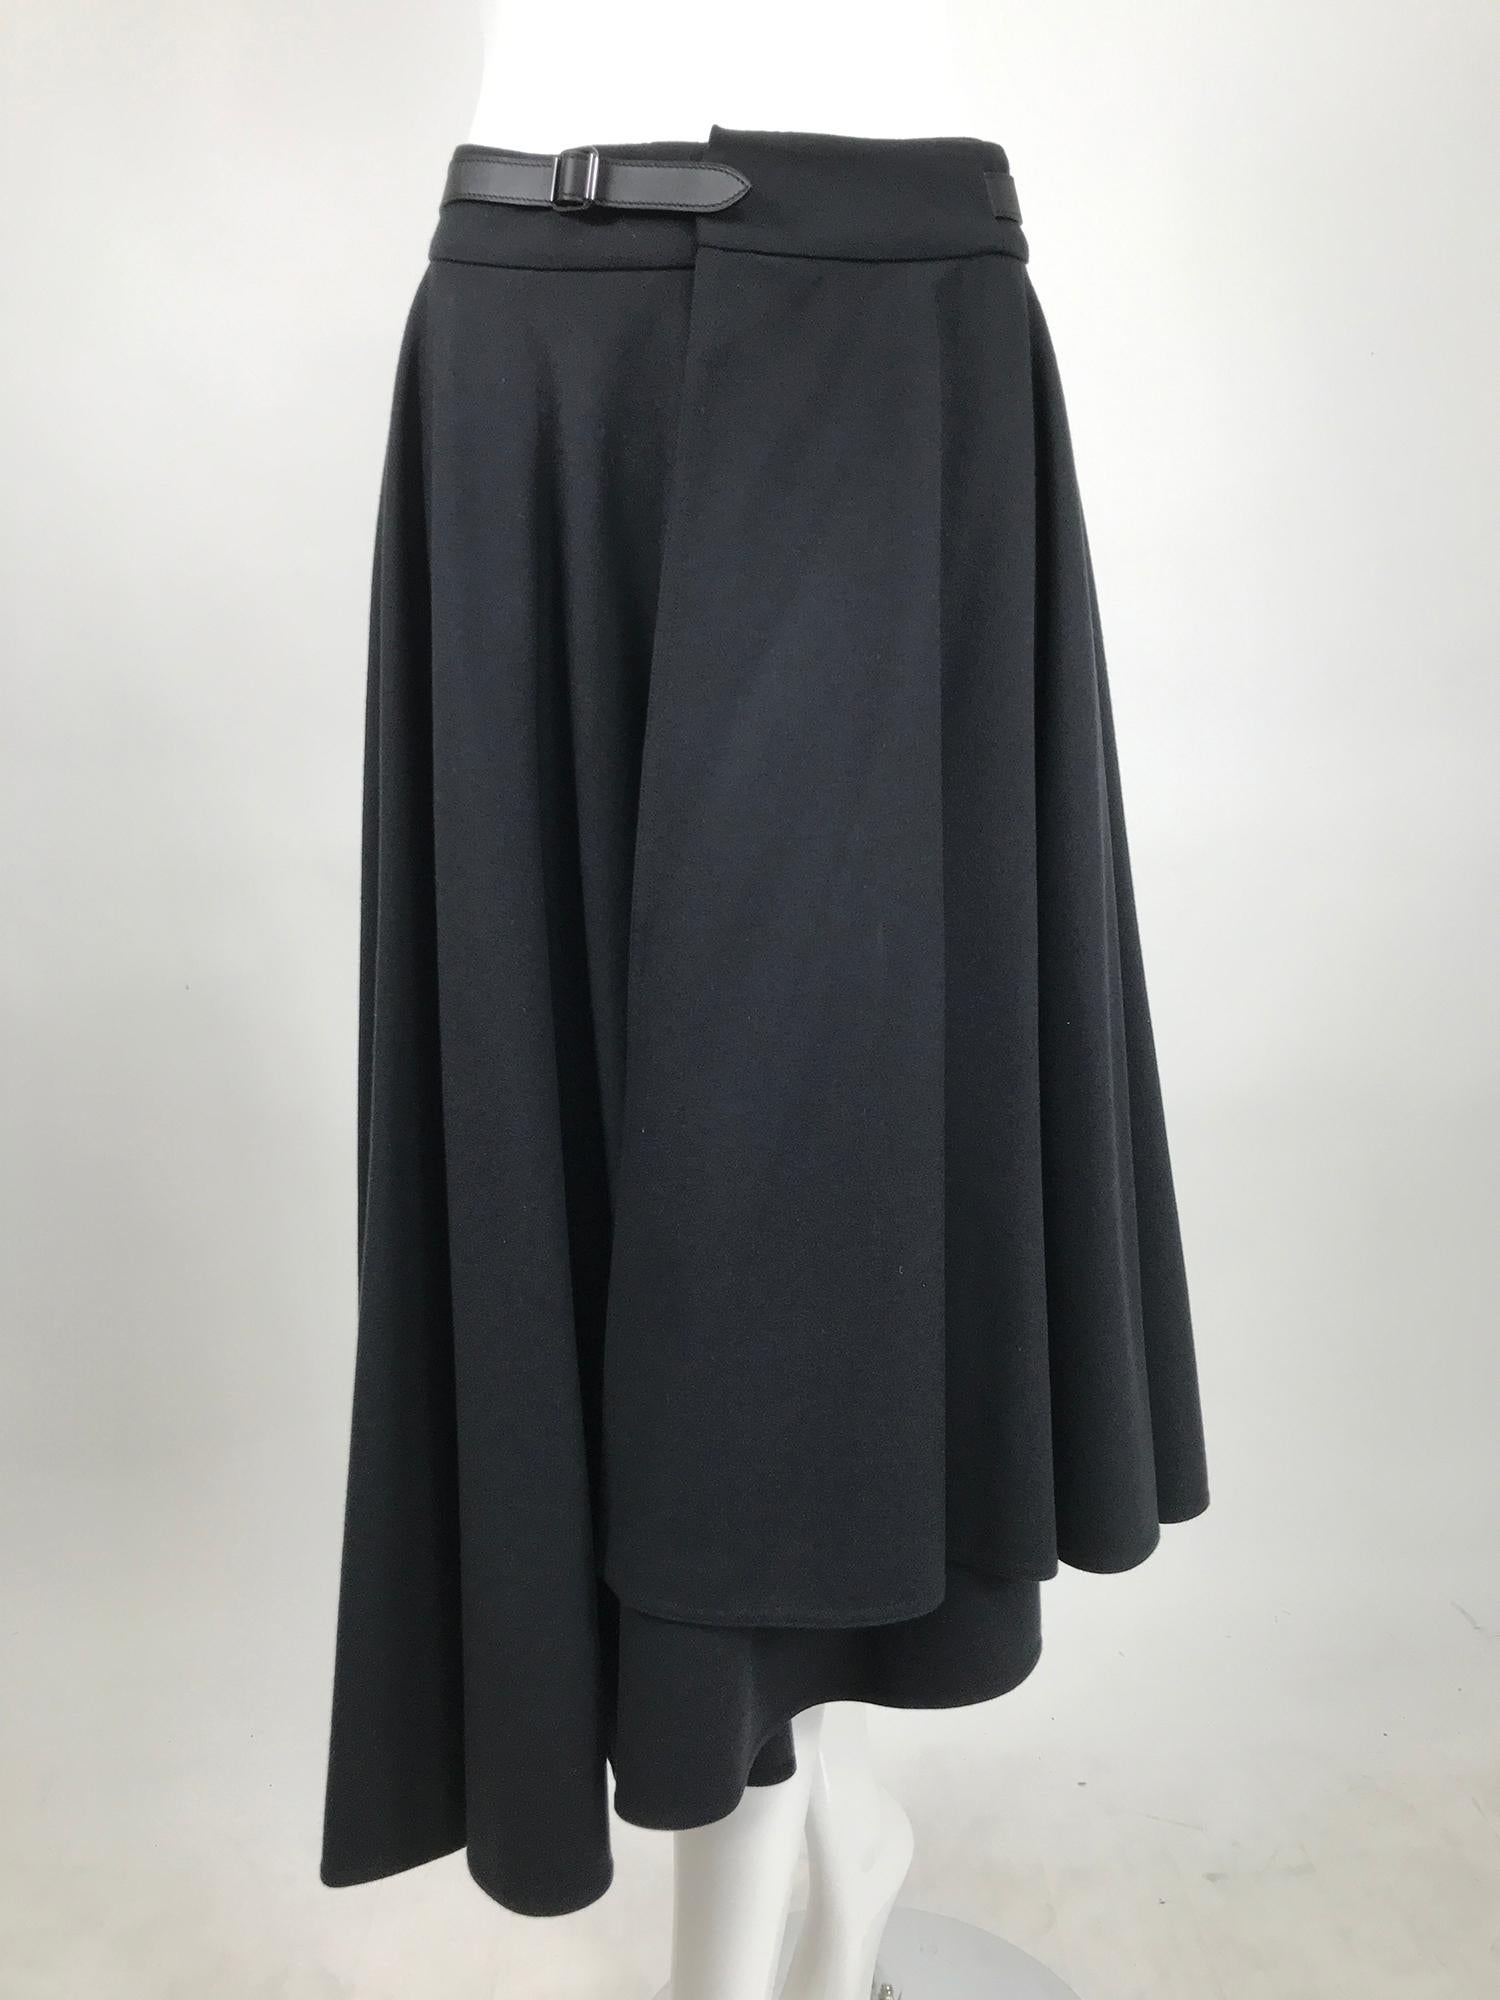 Hermès asymmetrical black wool, full circle wrap skirt. Unique wrap skirt of beautiful light weight black wool. The skirt wraps at the waist with a single button fastening inside and closes at the waist with a soft calf leather belt with buckle. The